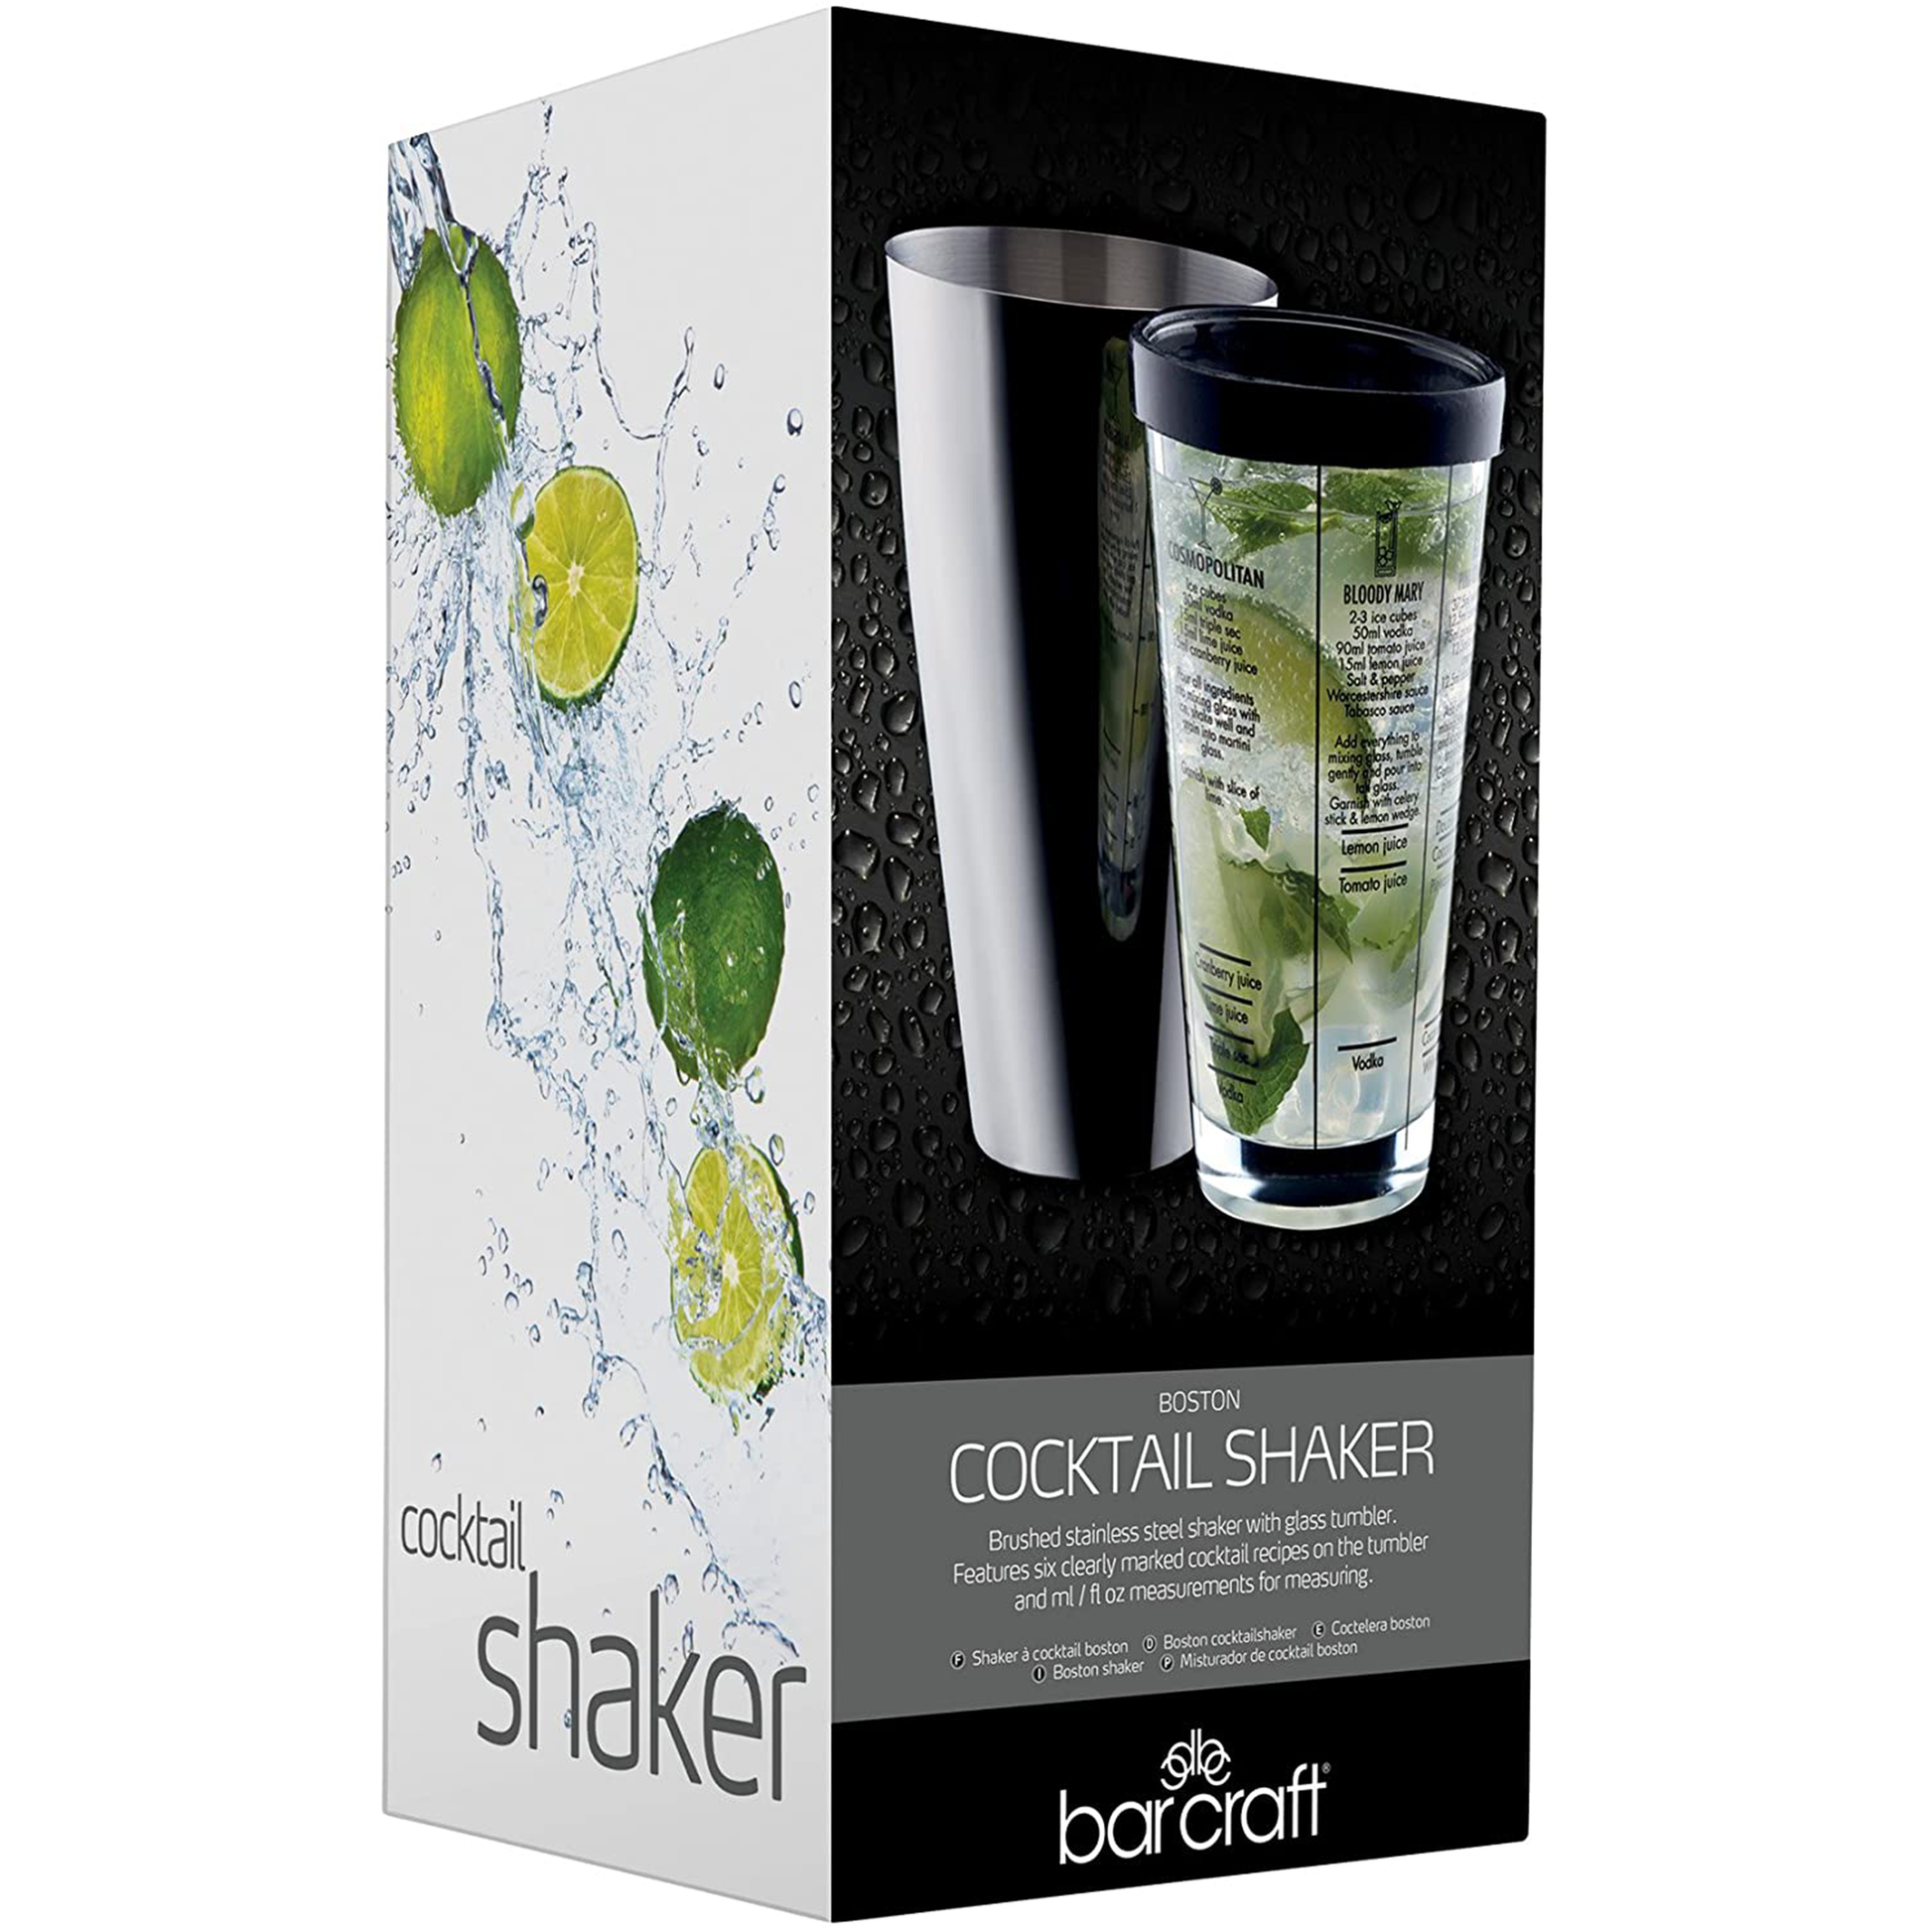 the box in which the cocktail shaker comes in